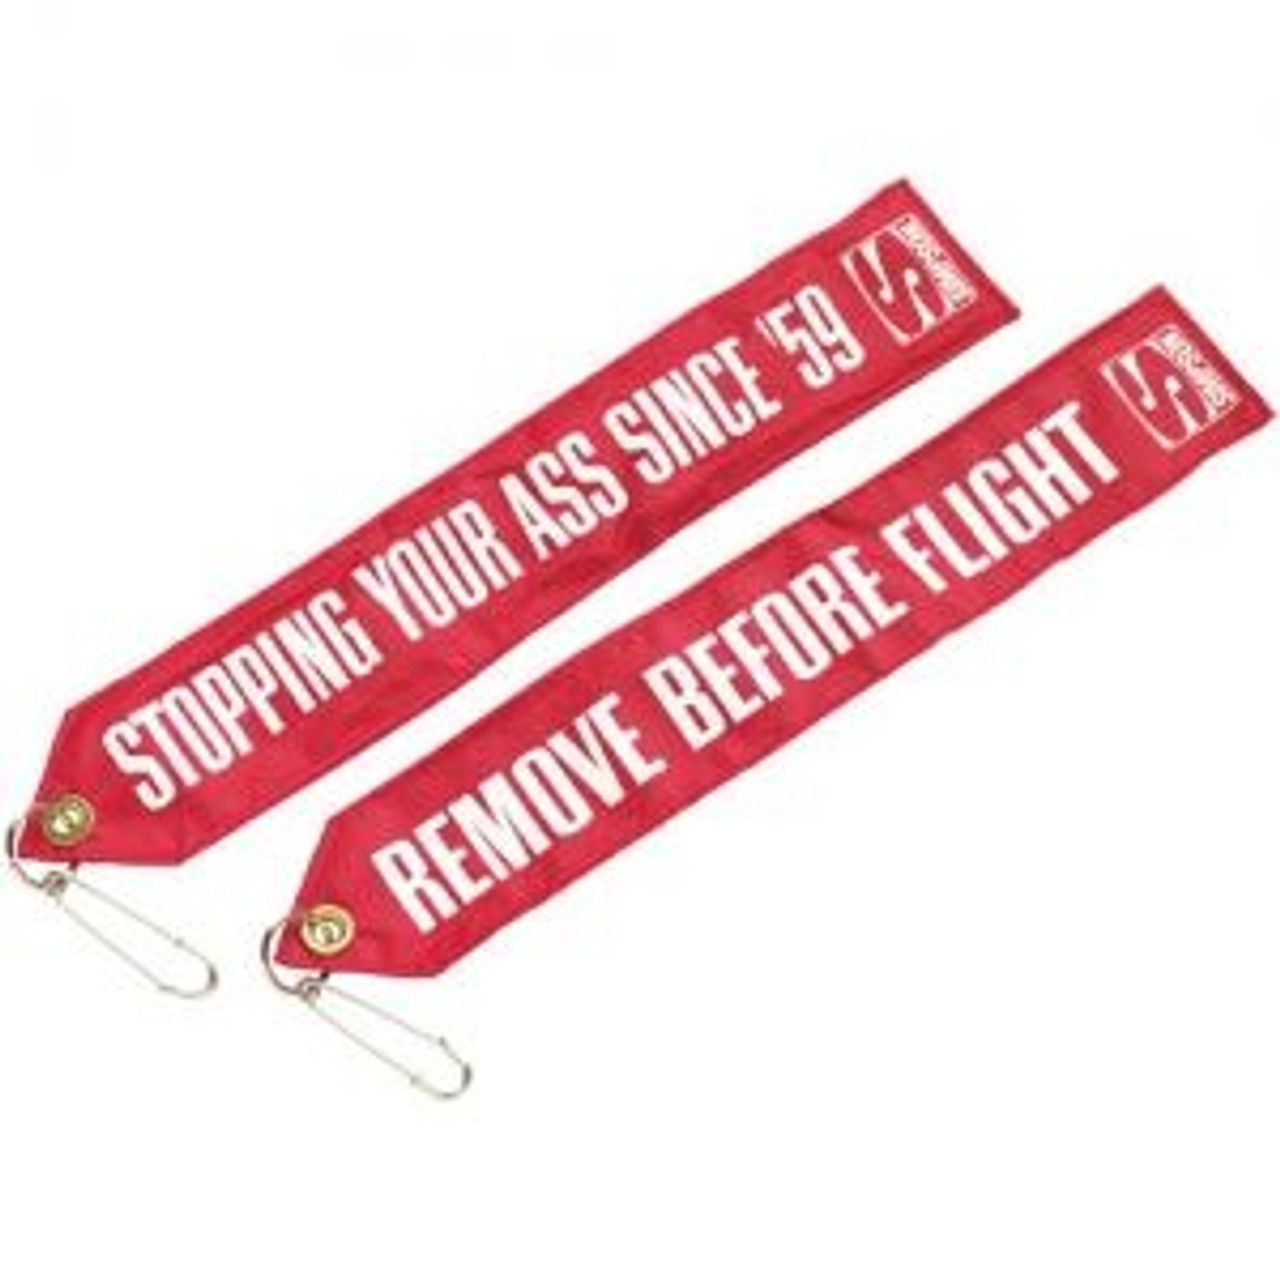 "Stopping Your Ass"  Tag chute Flag Simpson - one side and "Remove Before Flight" otherside